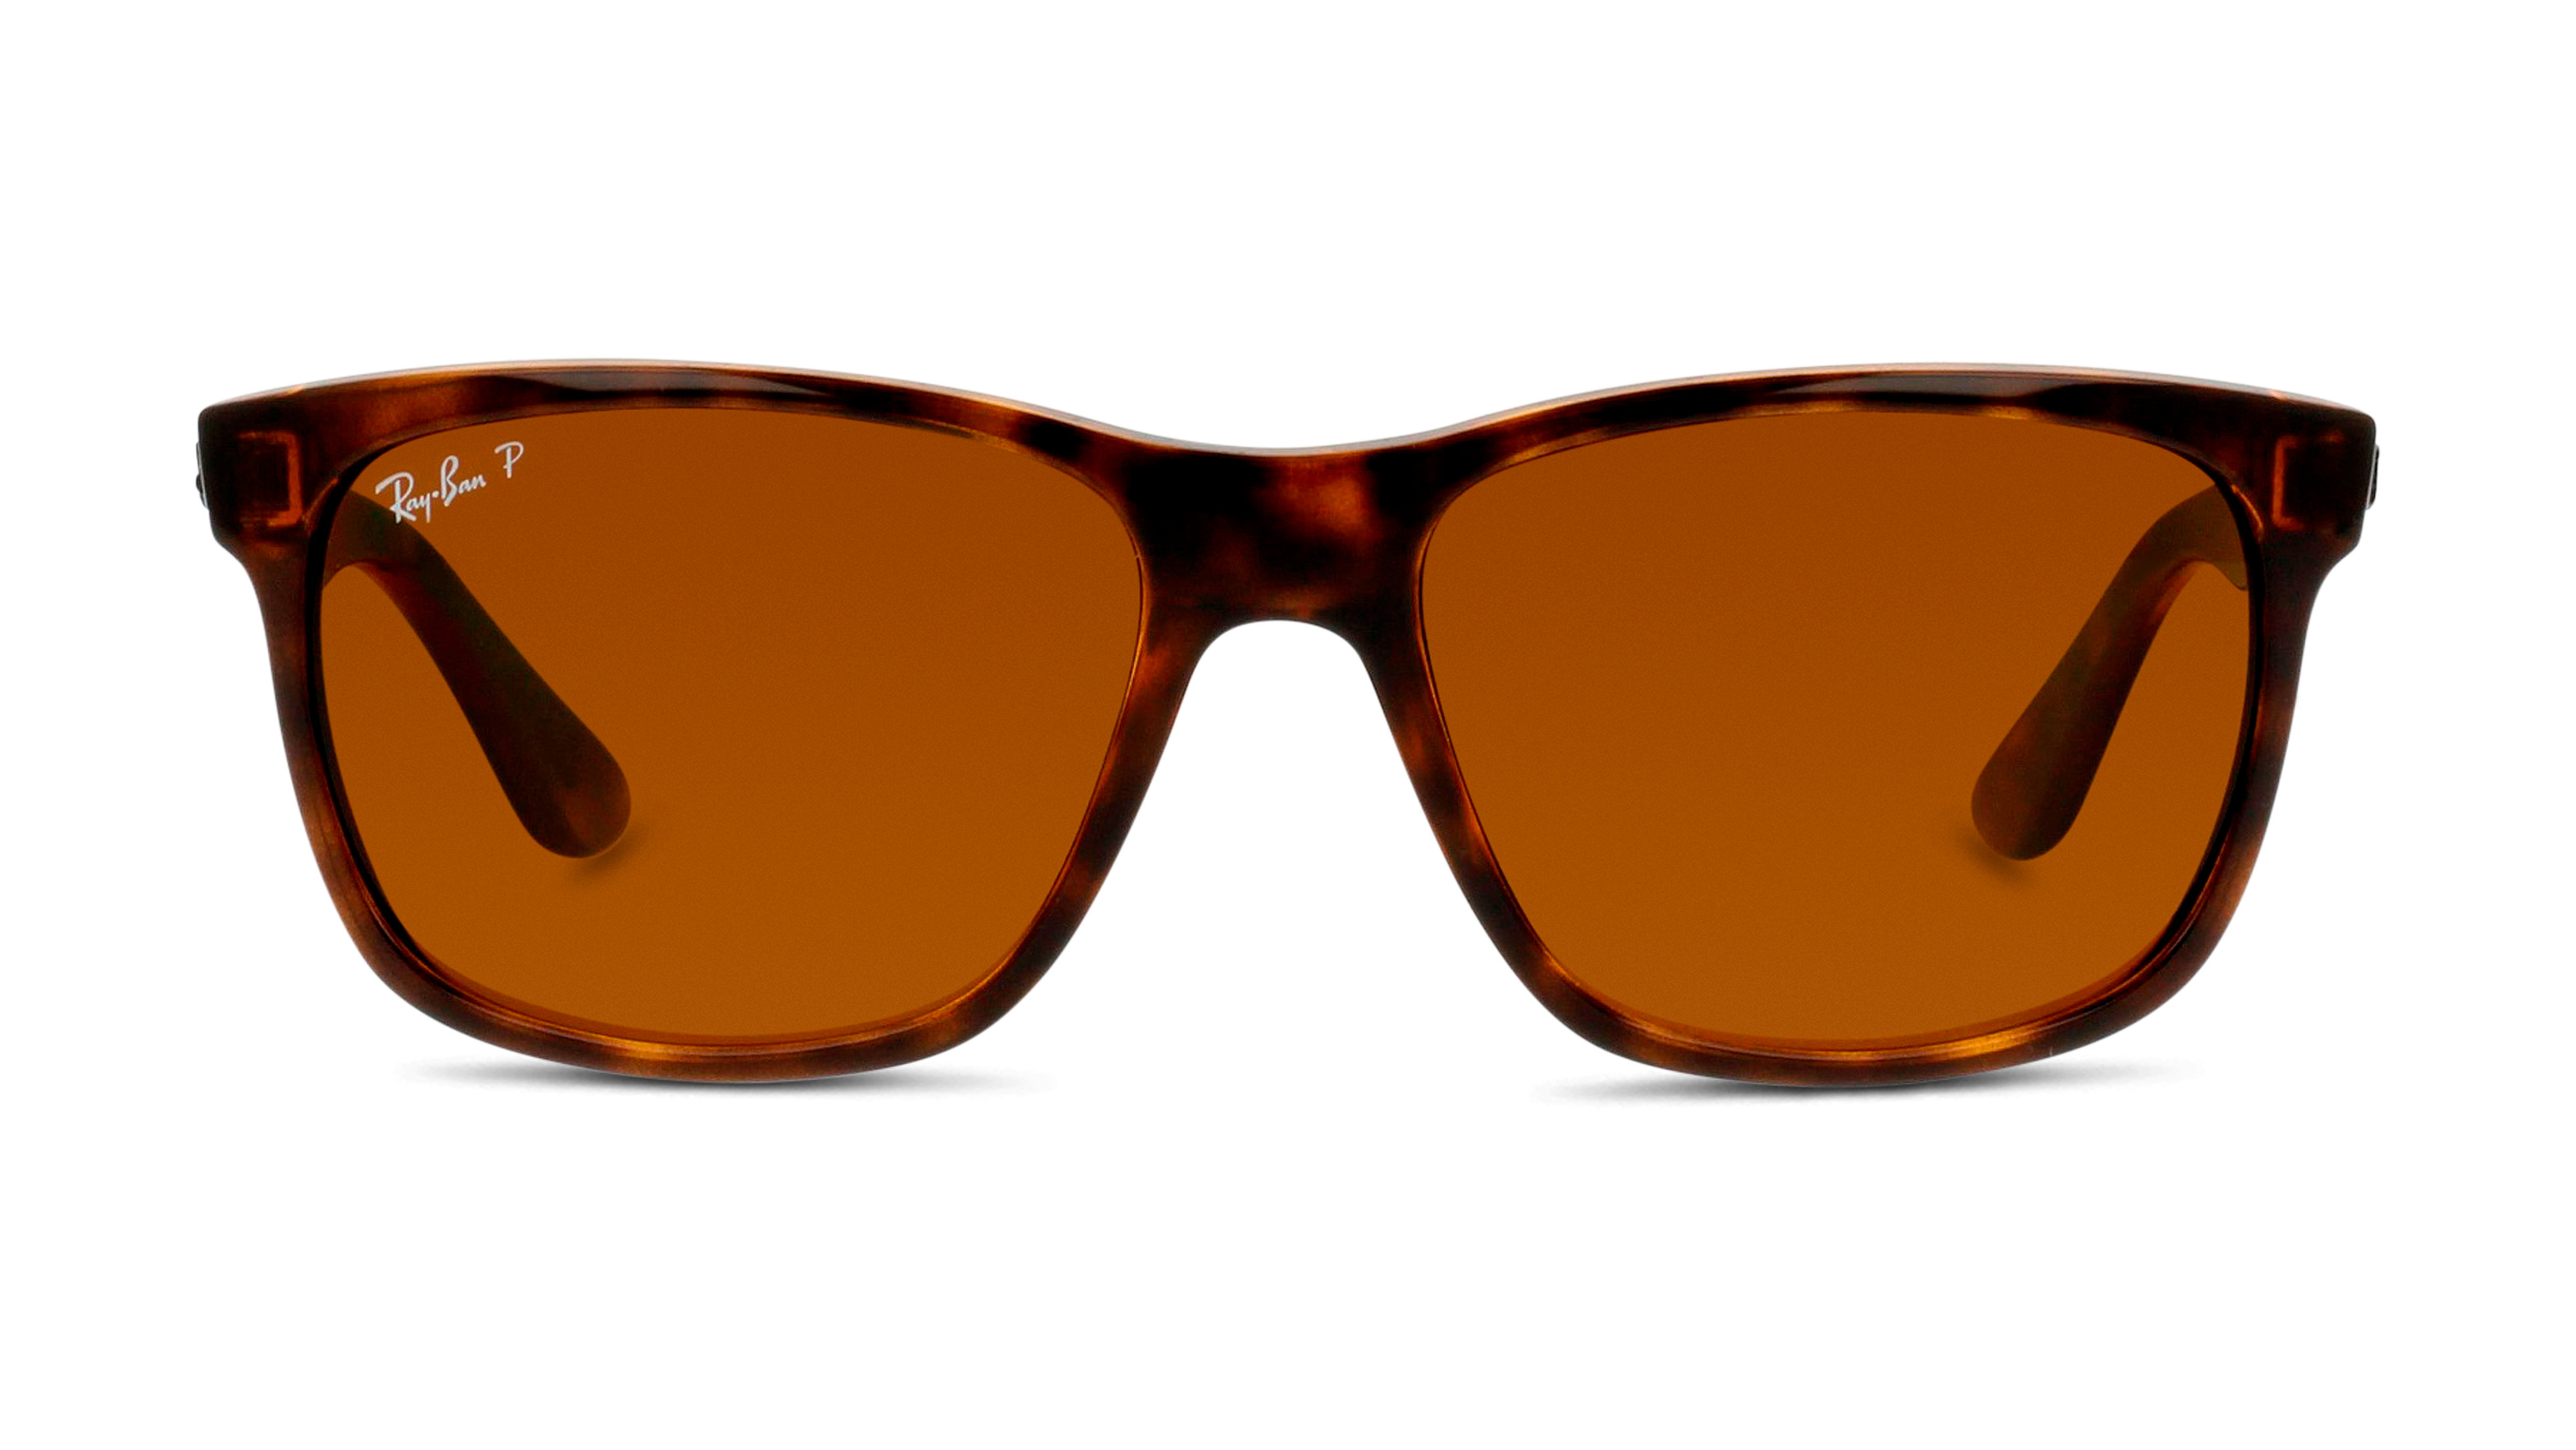 [products.image.front] Ray-Ban RB4181 0RB4181 710/83 Sonnenbrille